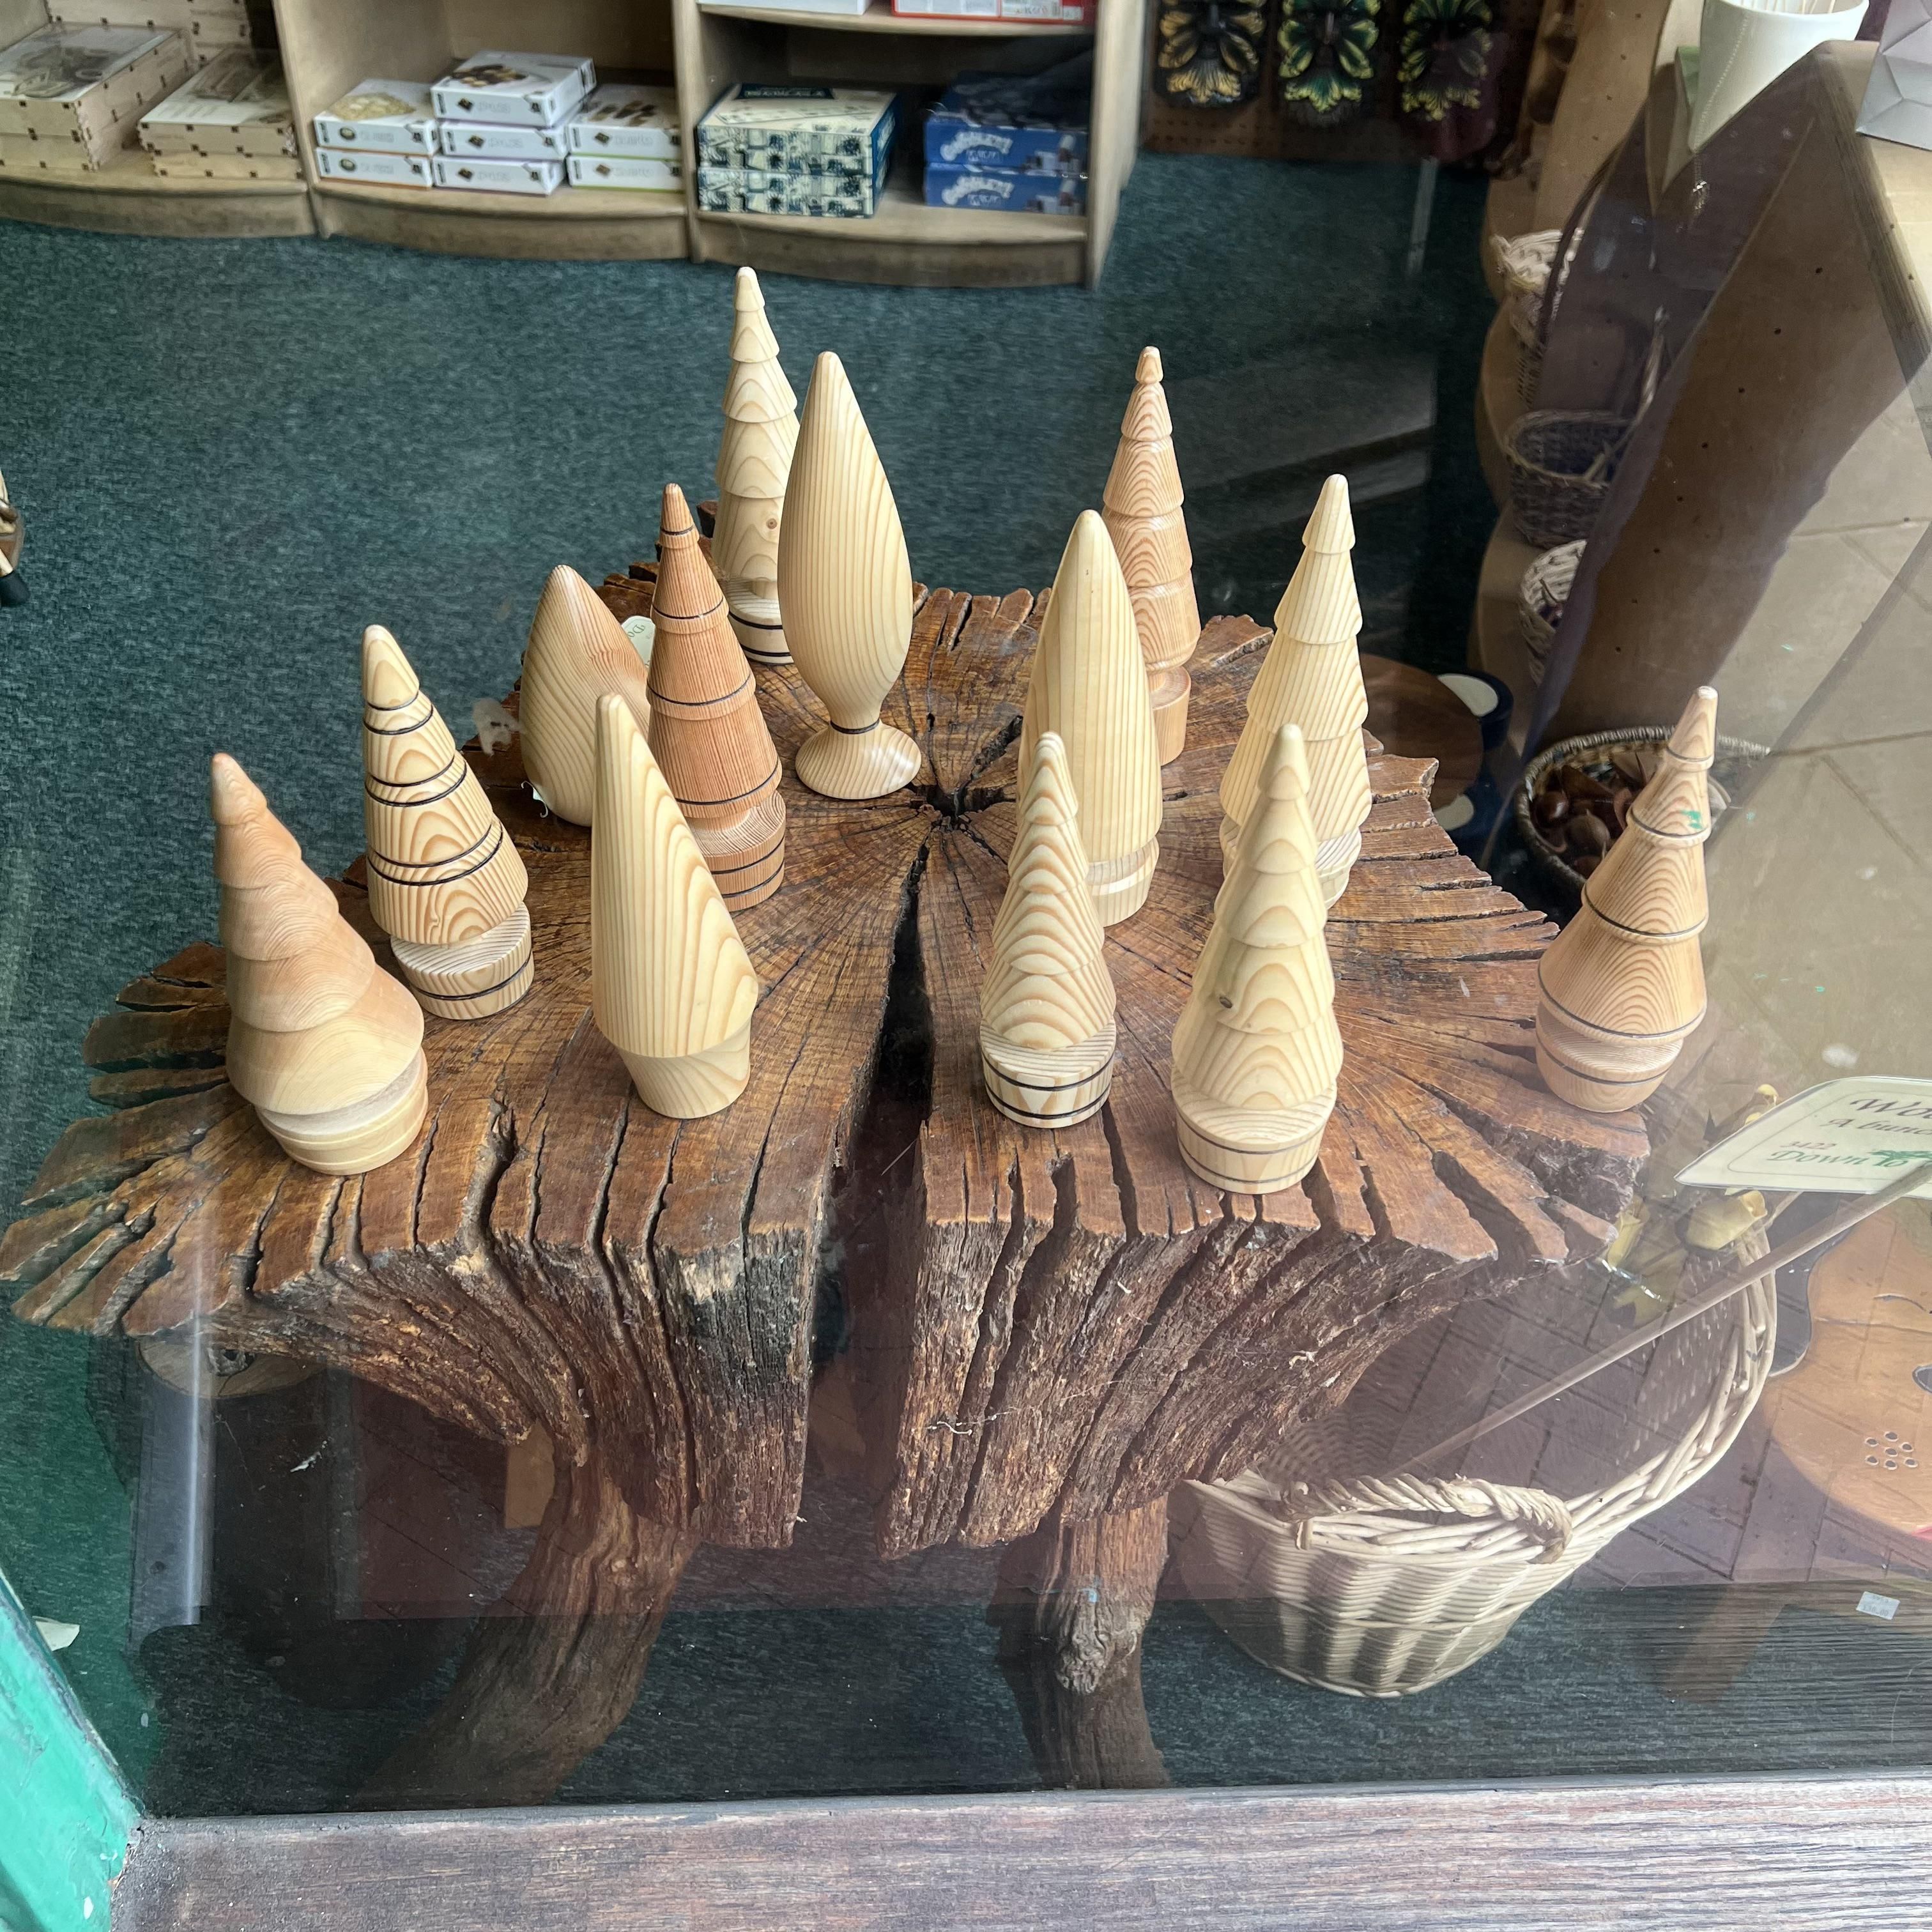 Lovely wooden 'Christmas trees'... The internet has ruined me...